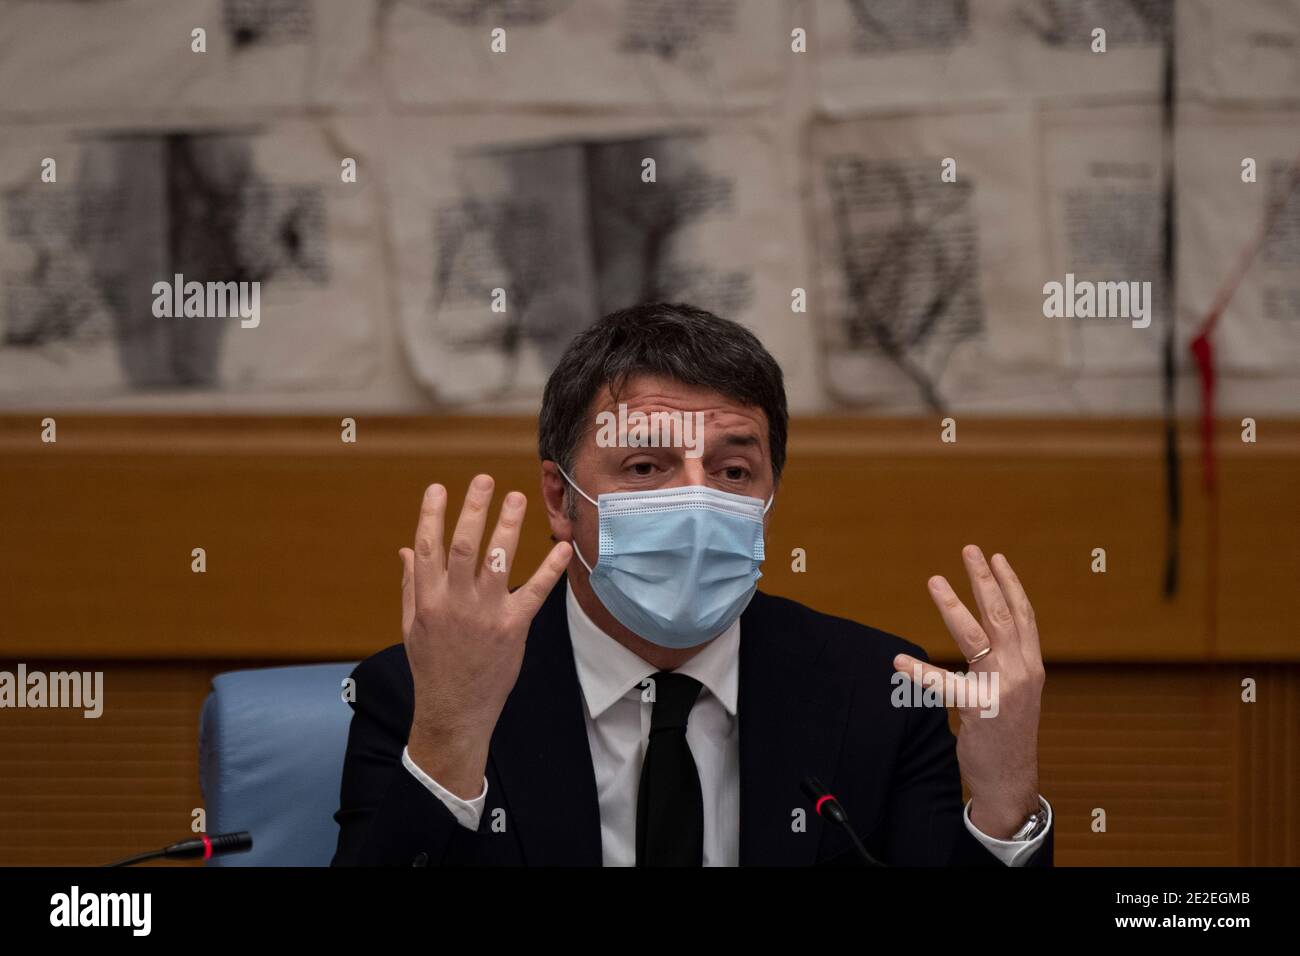 (210113) -- ROME, Jan. 13, 2021 (Xinhua) -- Italian Senator Matteo Renzi speaks during a press conference in Rome, Italy, Jan. 13, 2021. Matteo Renzi, a former prime minister, announced Wednesday that his Italia Viva party is withdrawing its cabinet members from Prime Minister Giuseppe Conte's coalition government. (Pool via Xinhua) Stock Photo